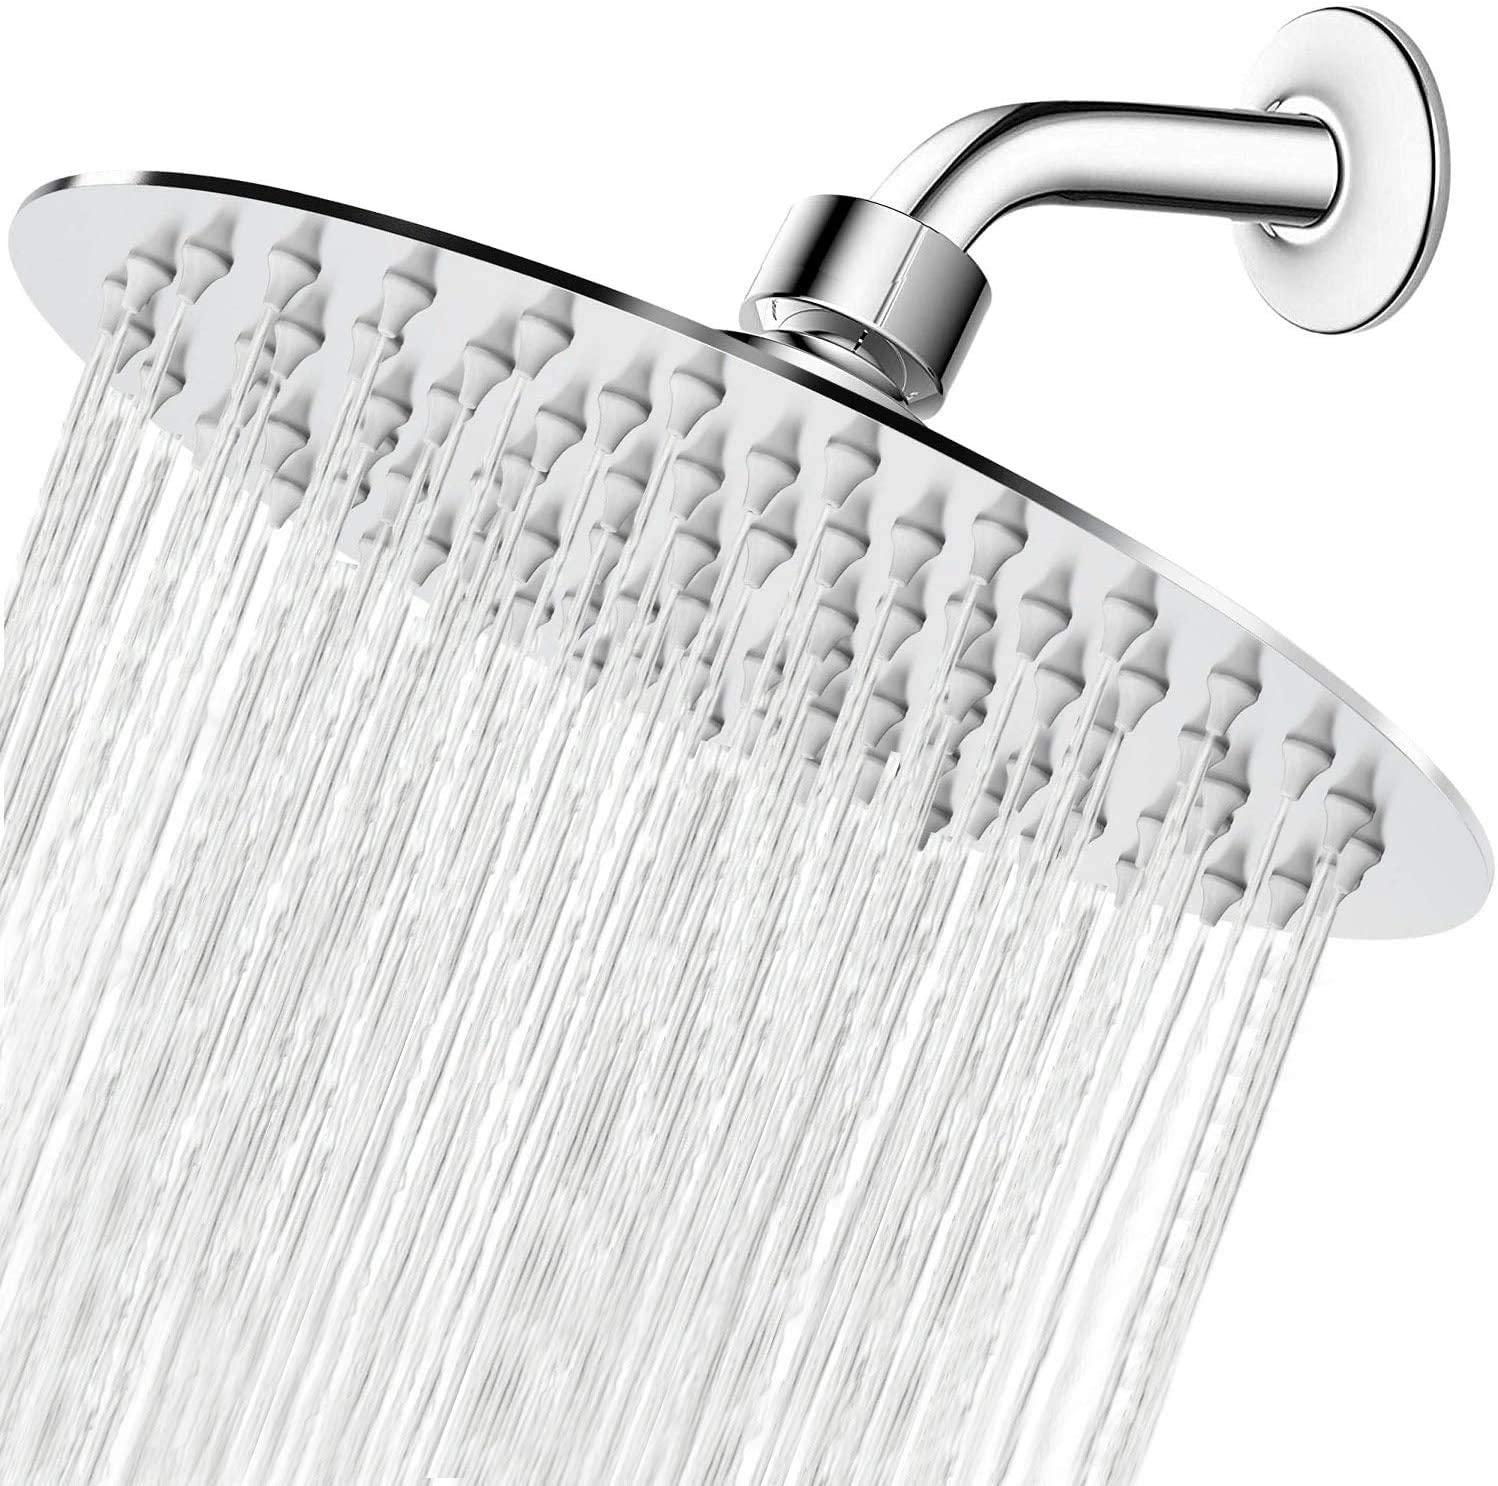 Extra Large 20 inch  Stainles Steel Water Rainfall Overhead Shower Head US 